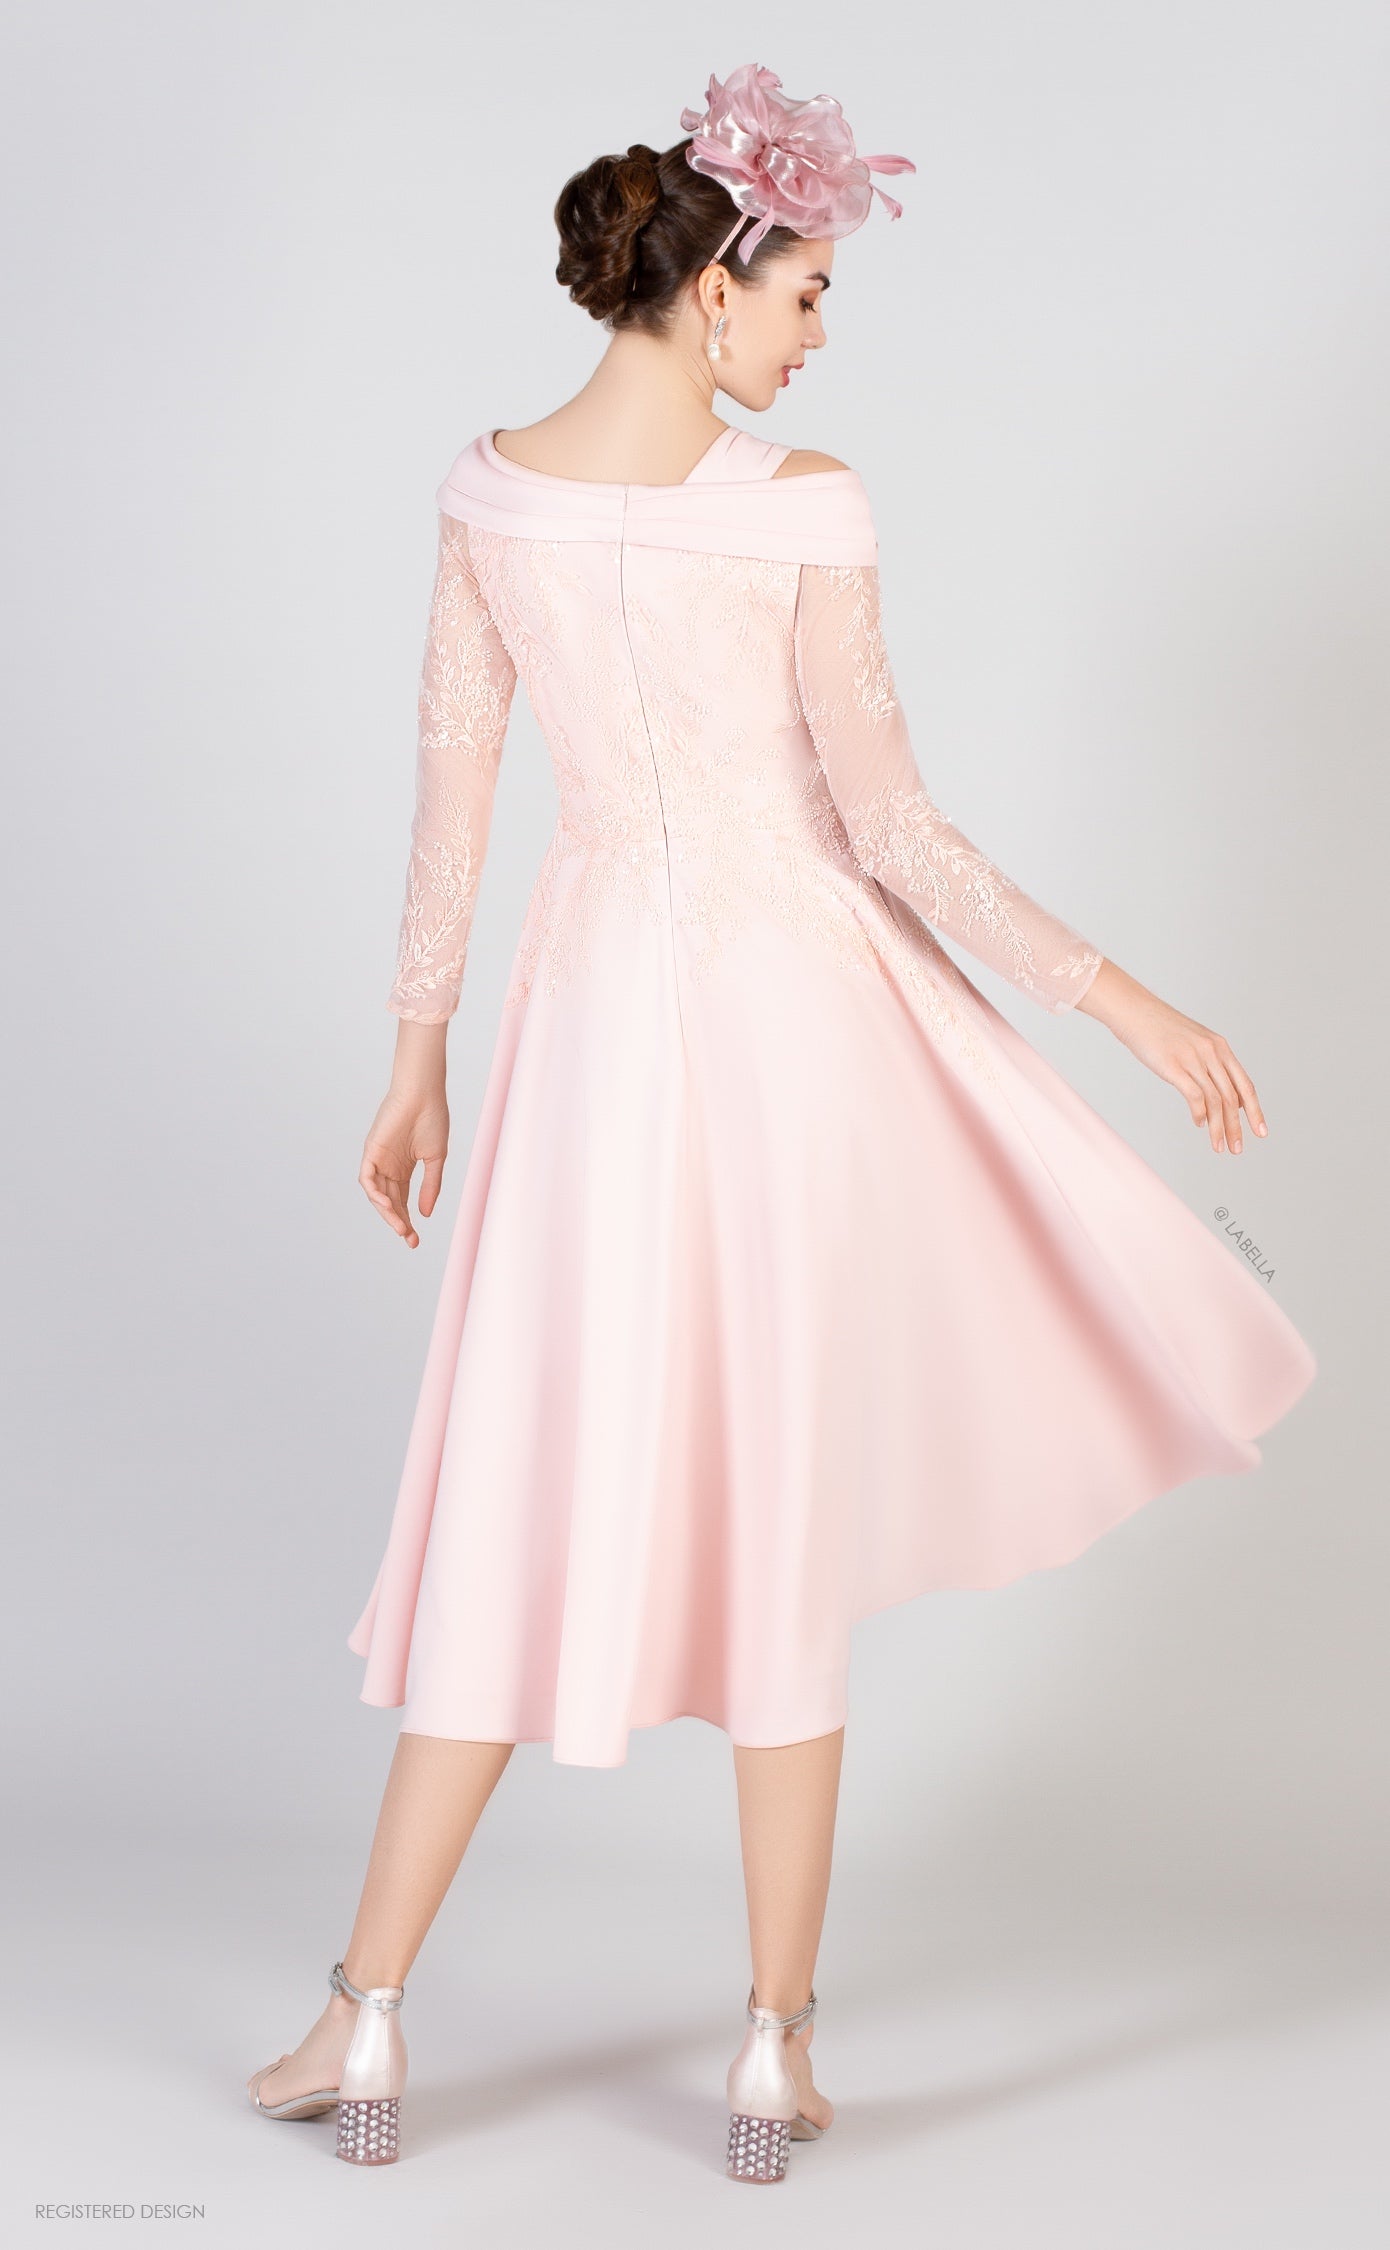 Light Pink Dress With Lace Sleeve & Sequinned Embellishment